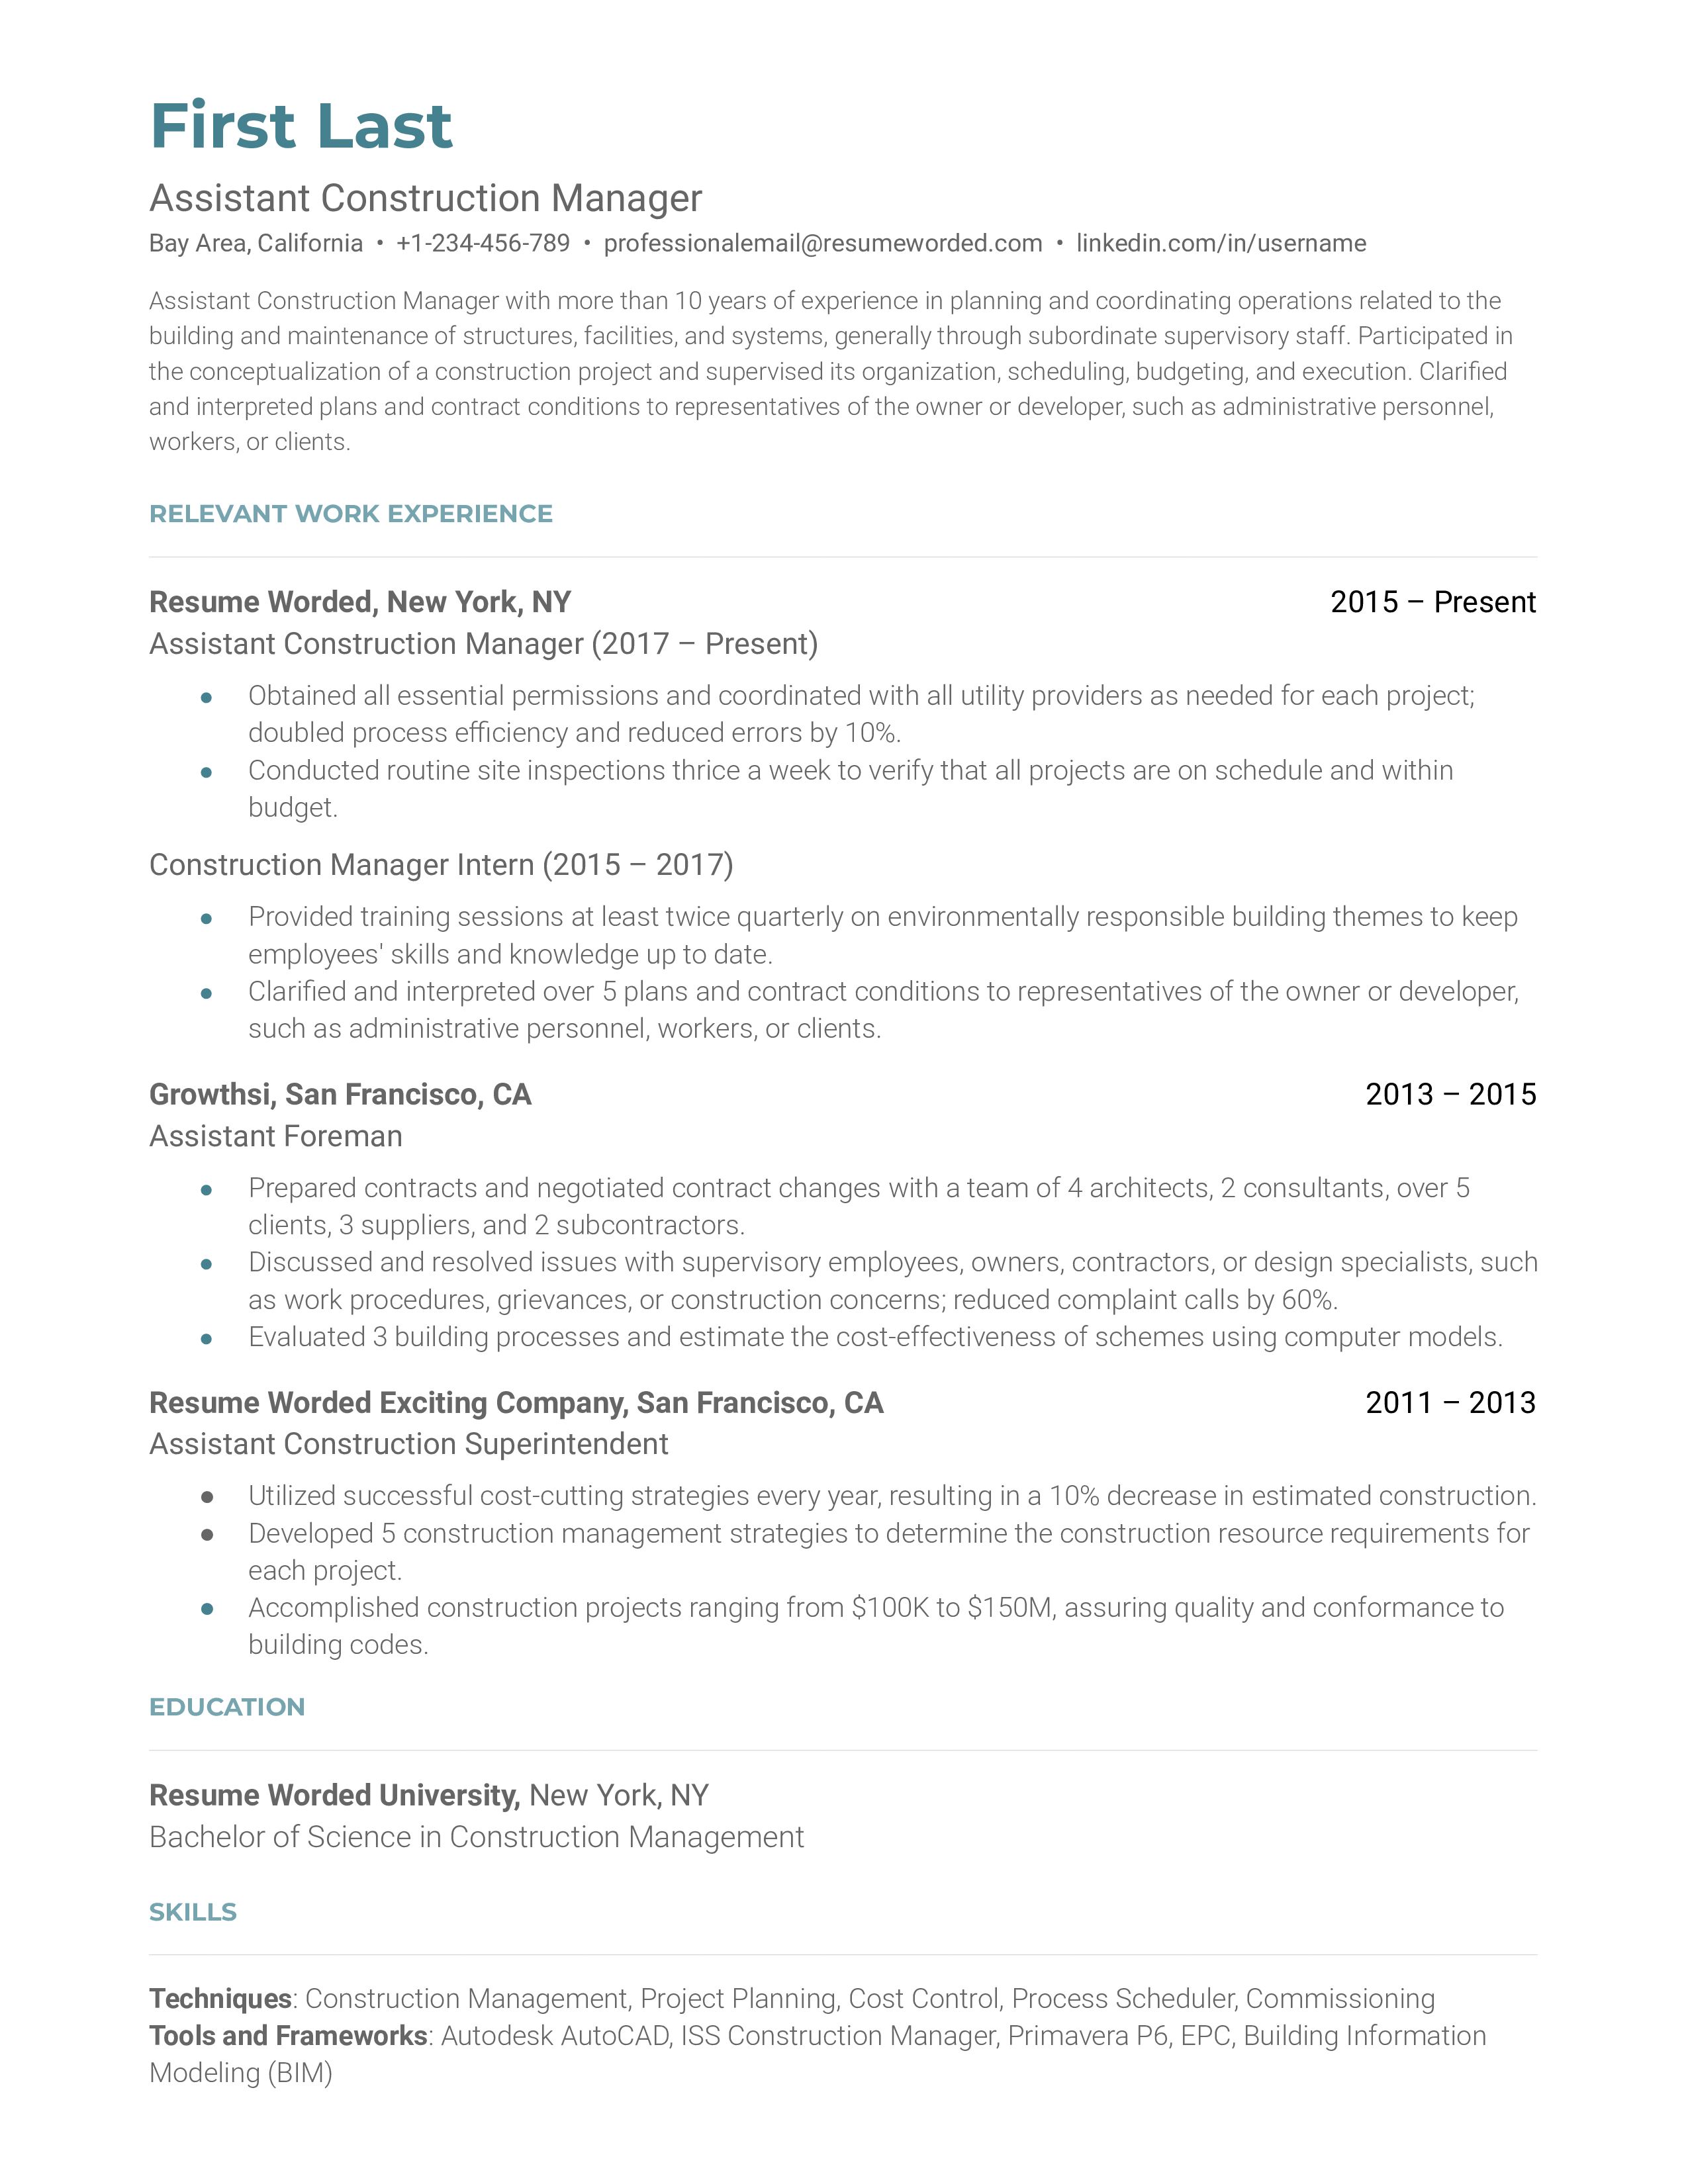 An Assistant Construction Manager resume template showcasing experience in planning and coordinating operations